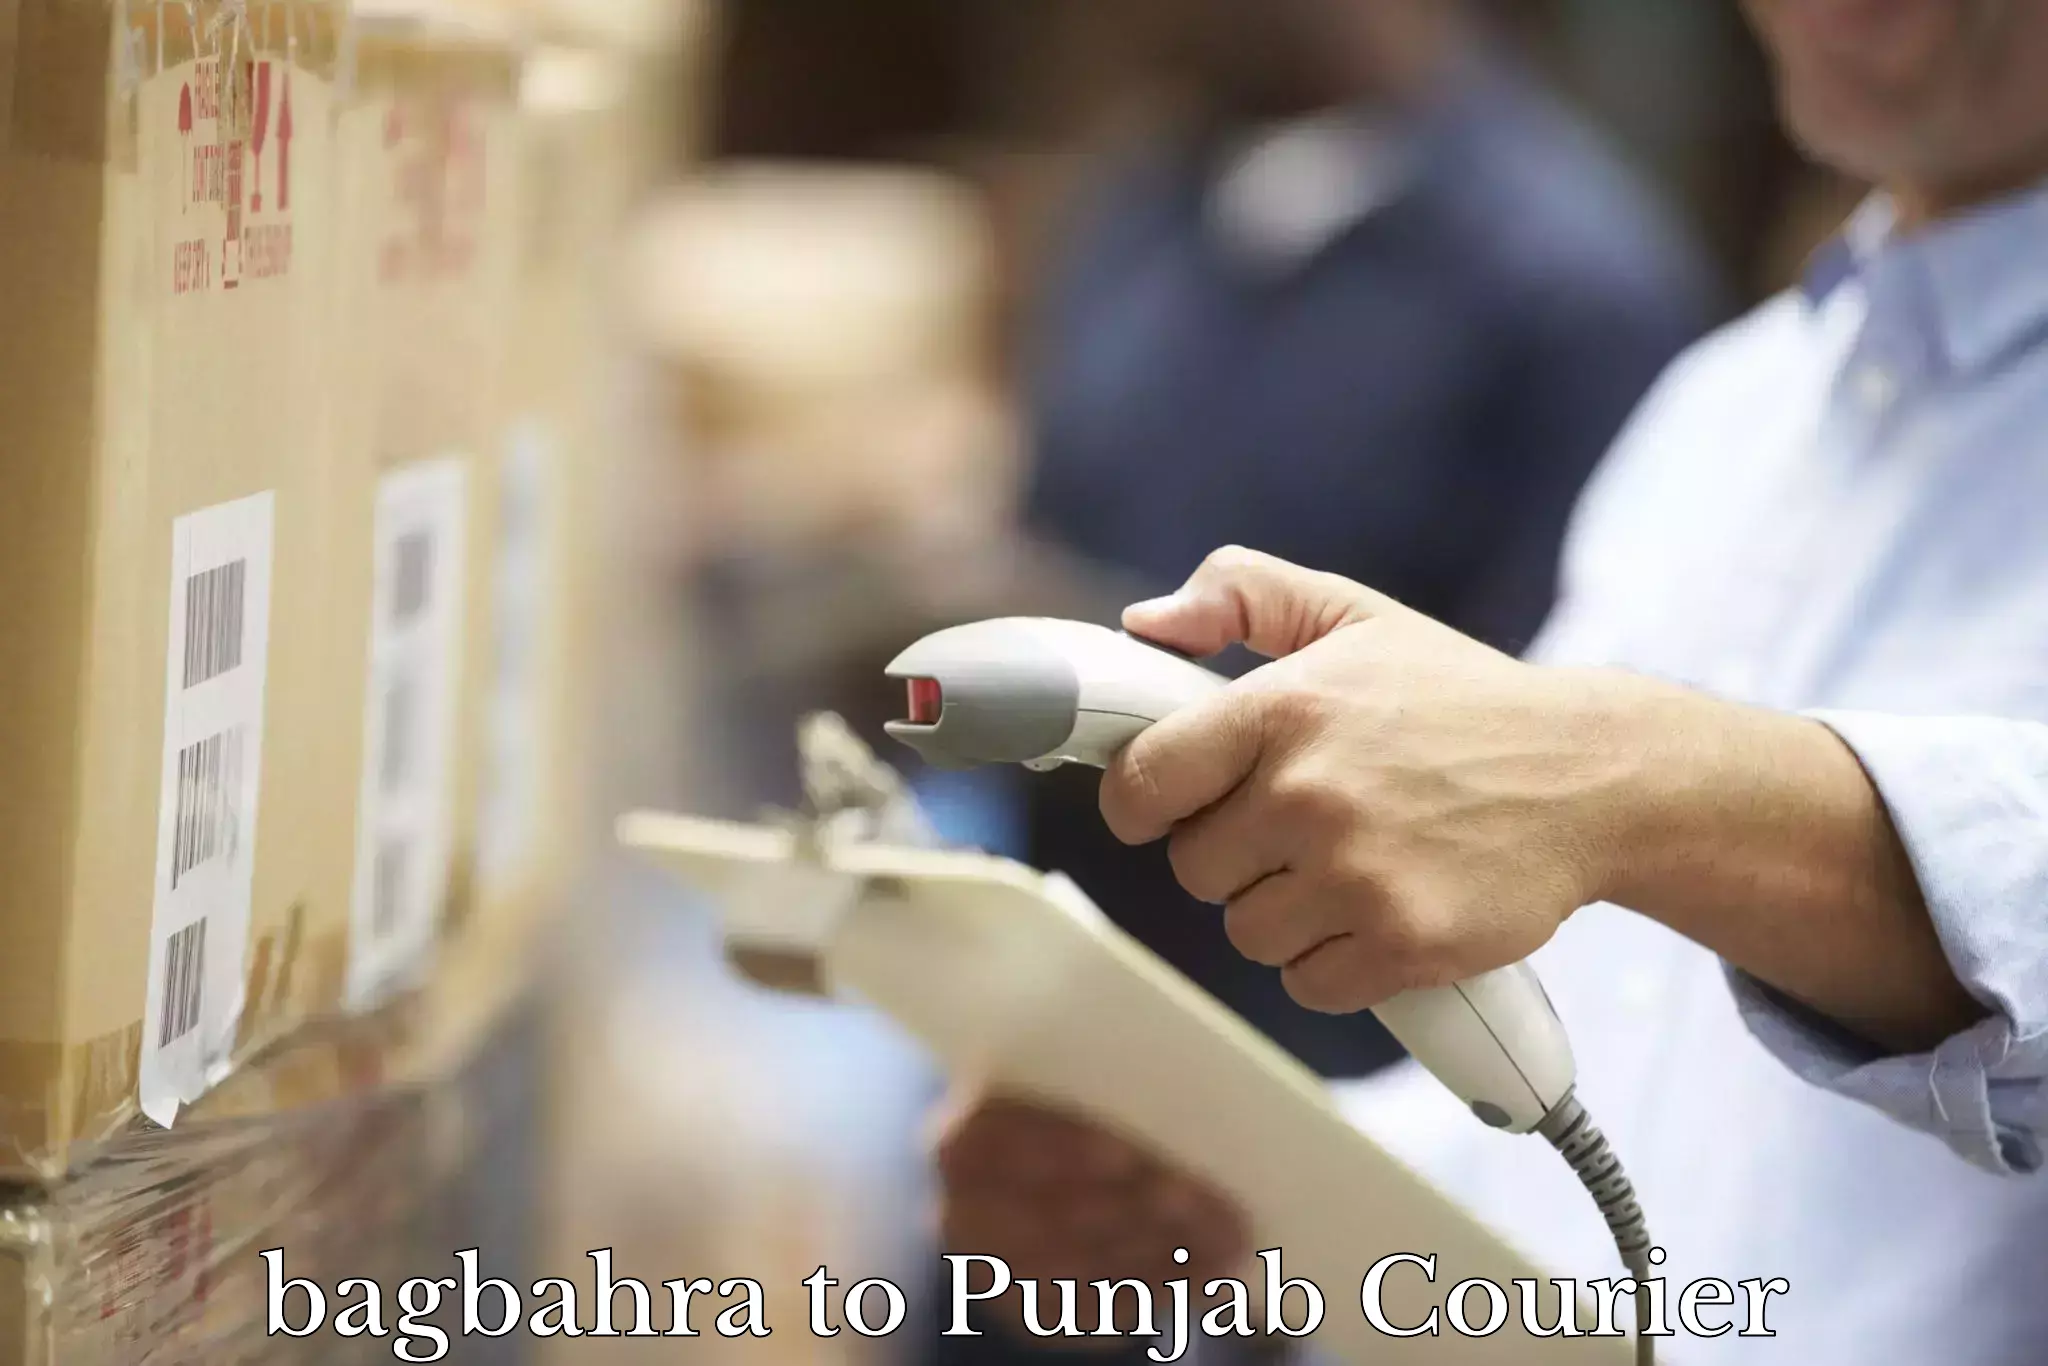 Courier service efficiency bagbahra to Goindwal Sahib